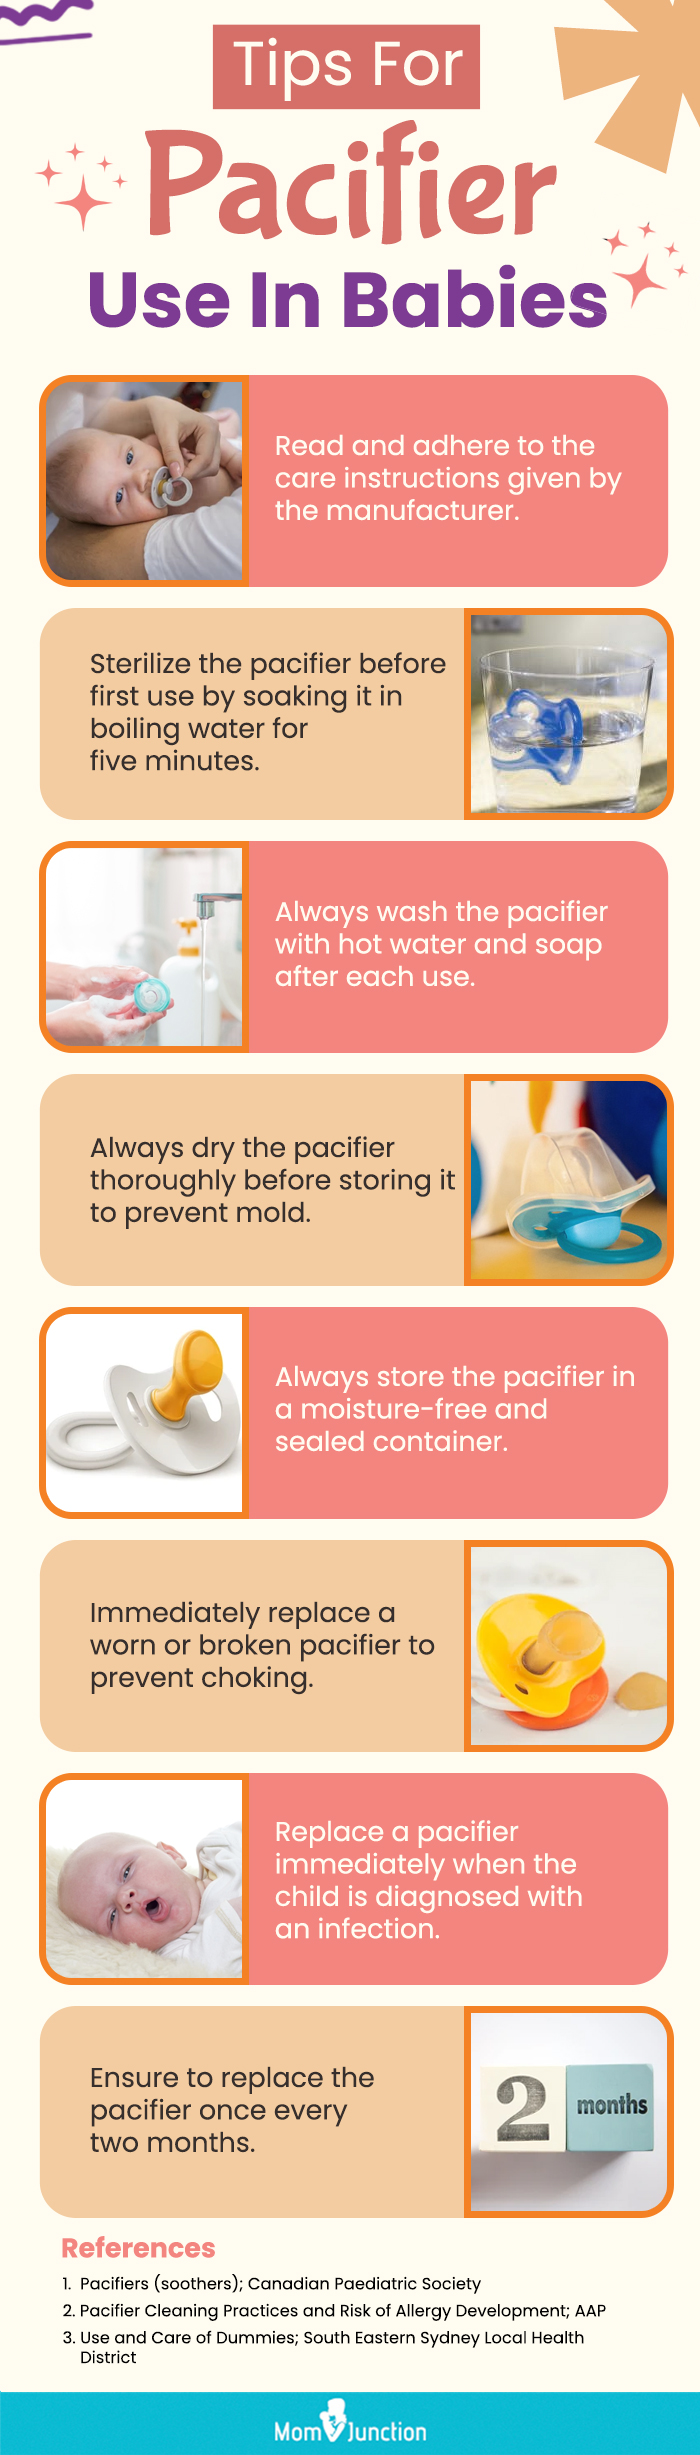 Tips For Pacifier Use In Babies (infographic)